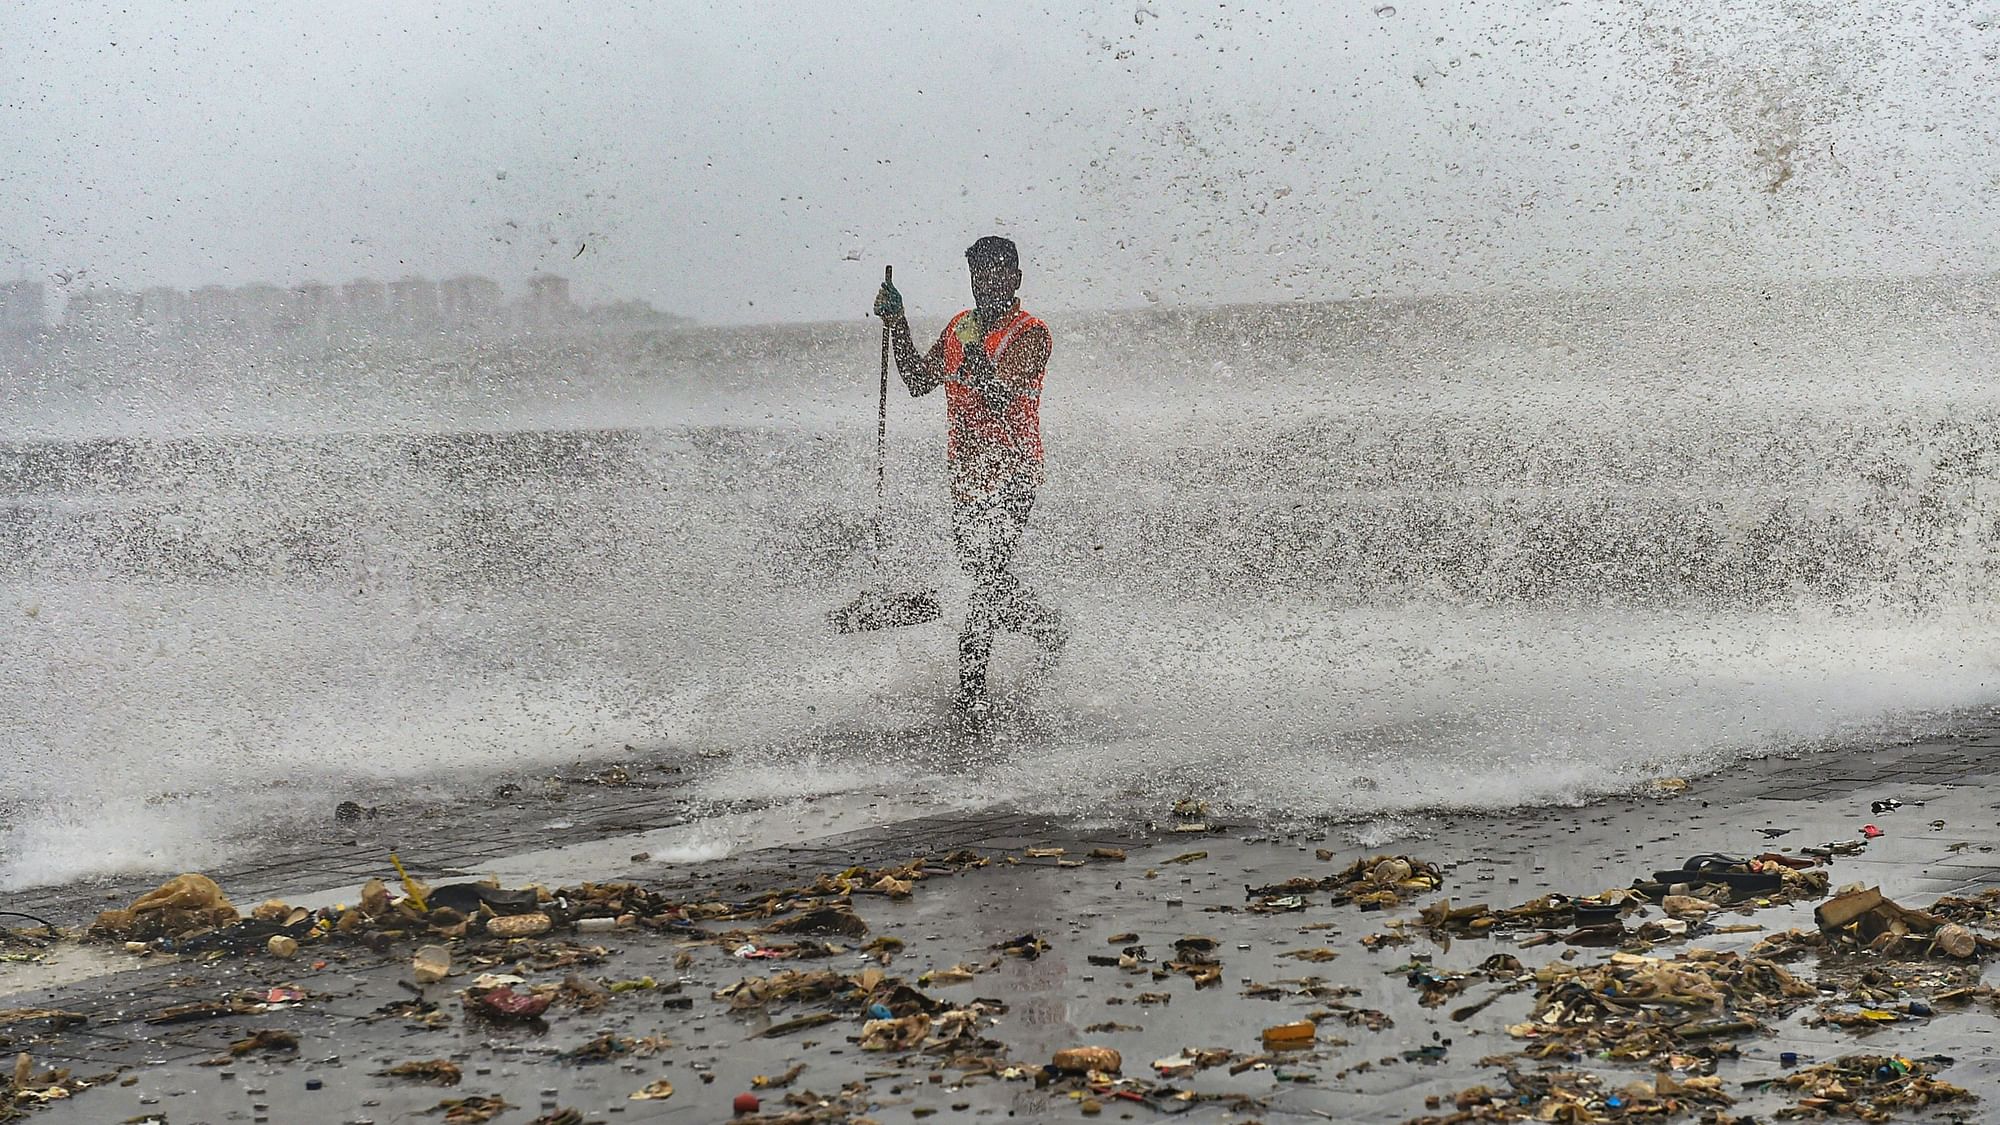 A civic worker clears the plastic waste and garbage thrown out of the sea during a high tide at Marine Drive promenade in Mumbai, on Sunday, 7 July.